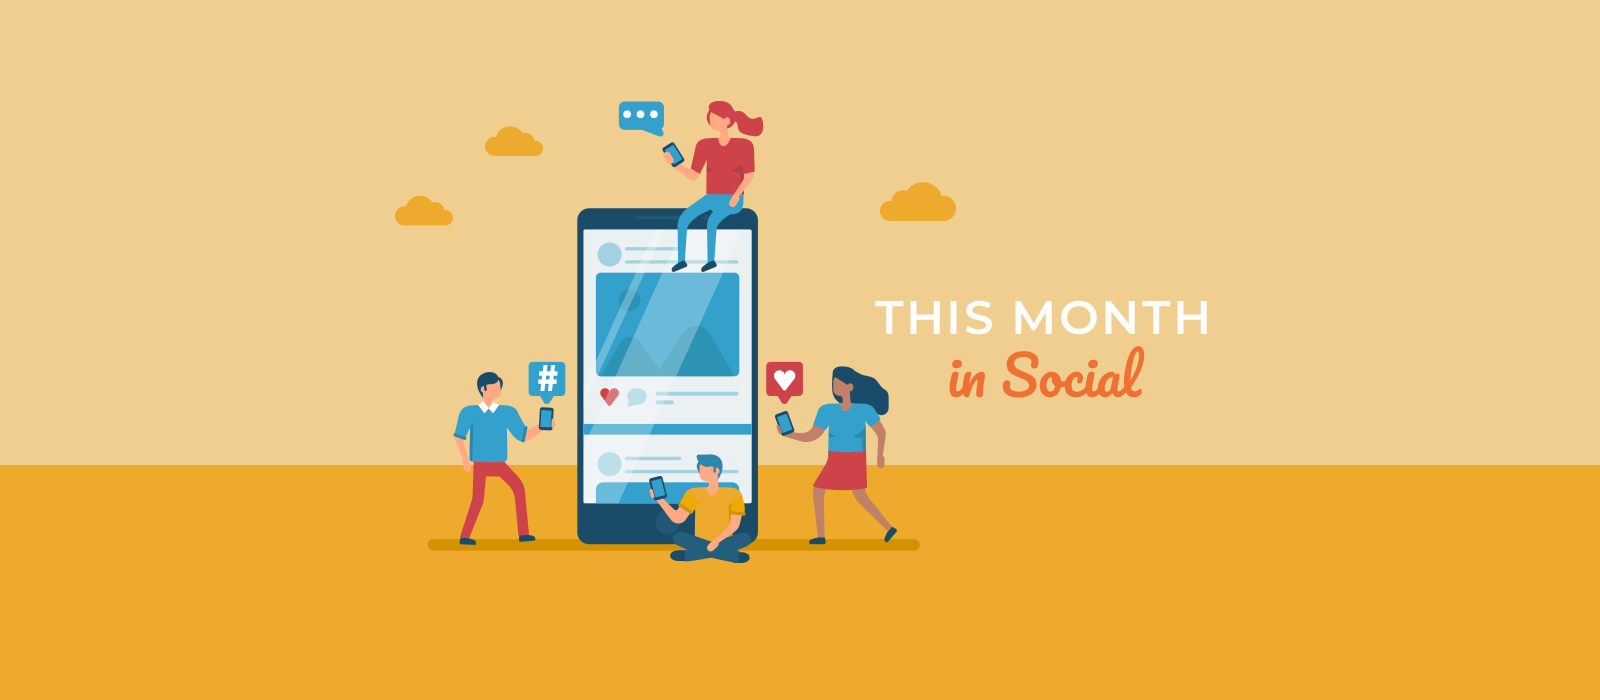 This month in social media - October